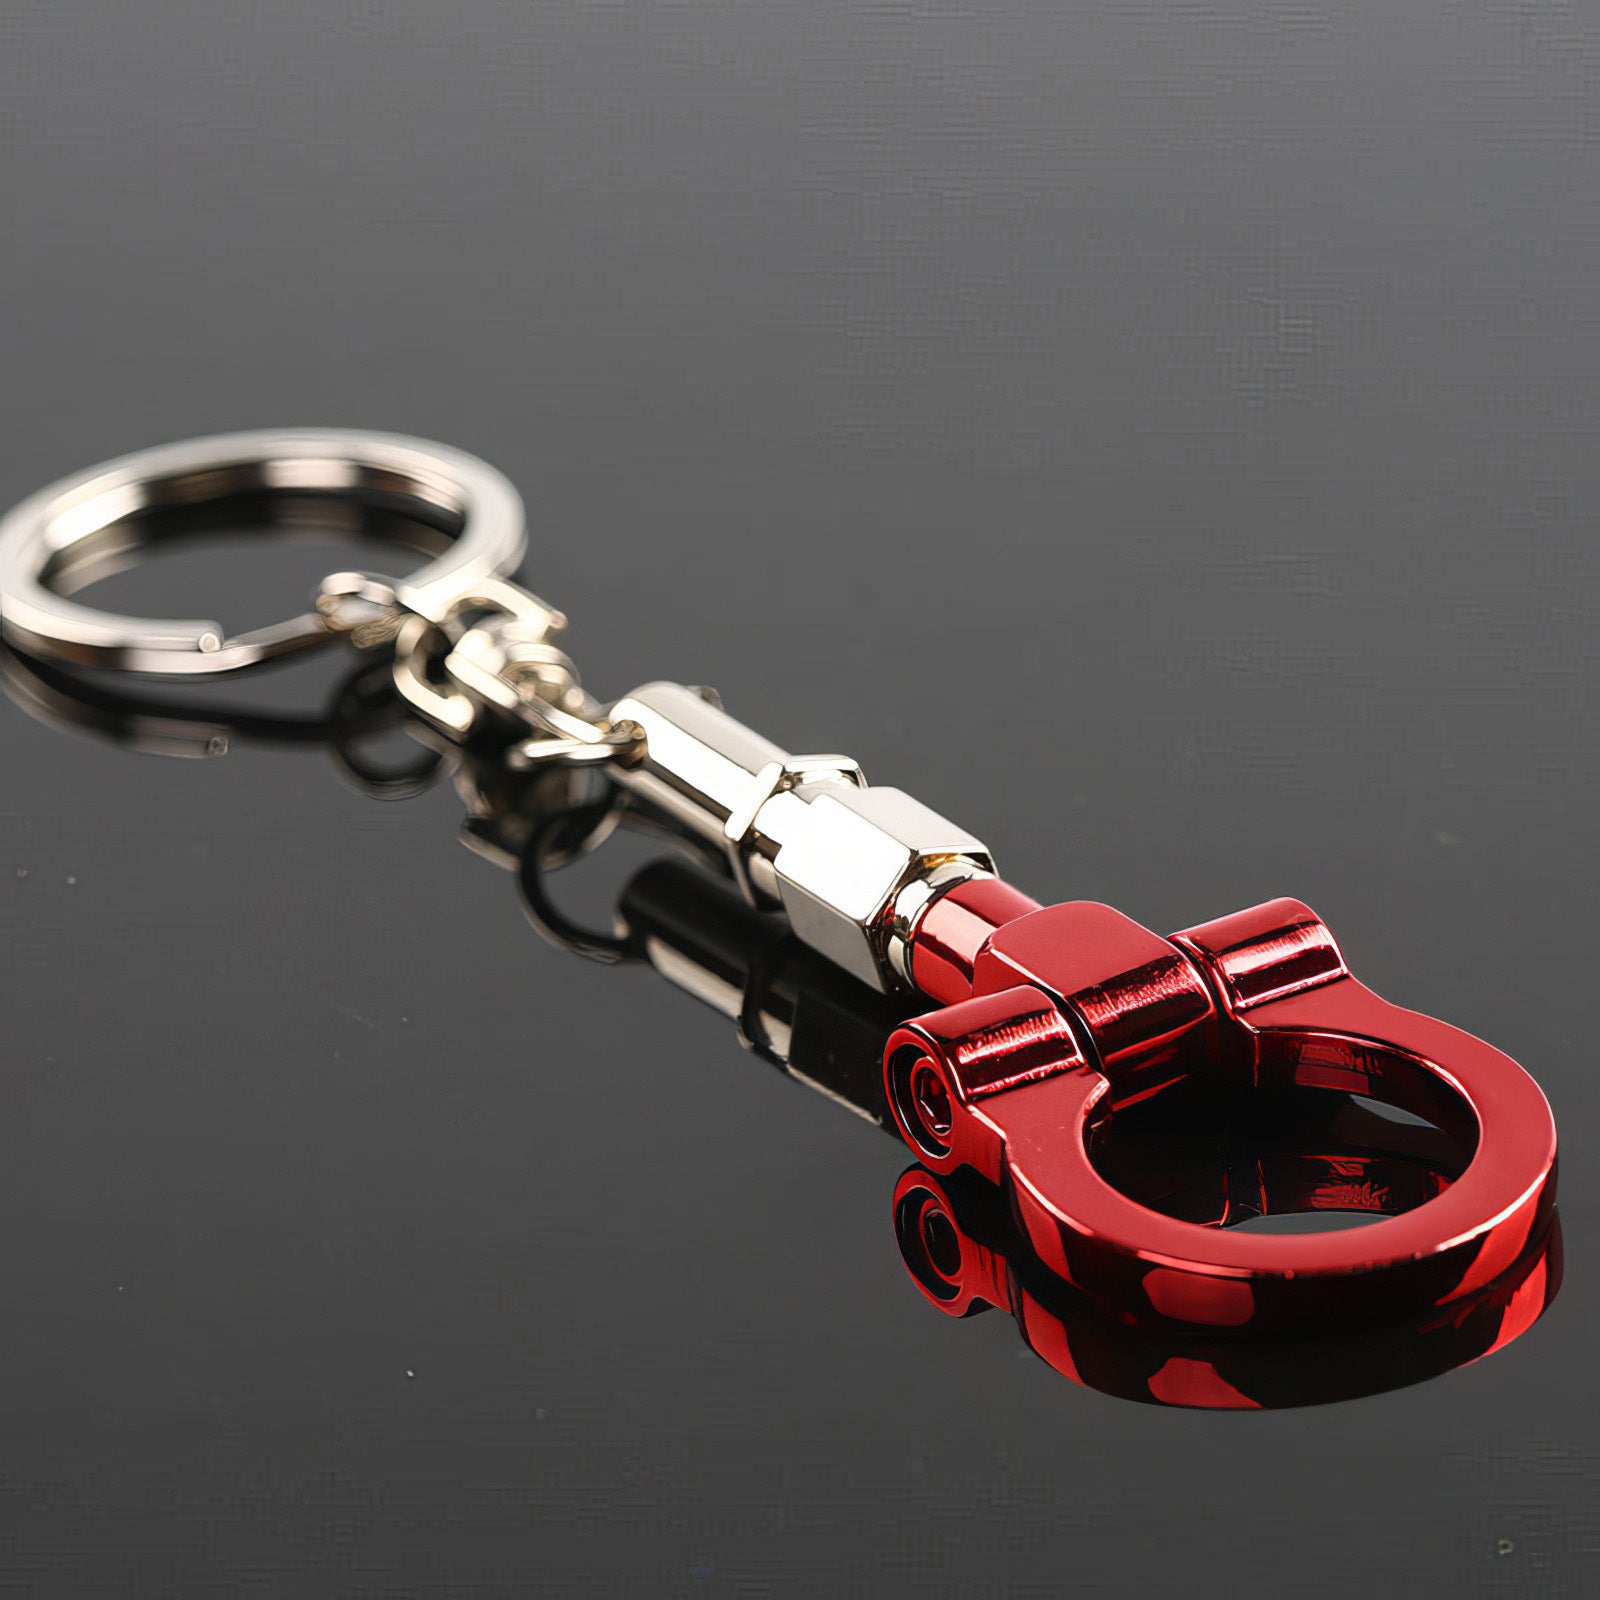 Tow hook keychain with red hook.